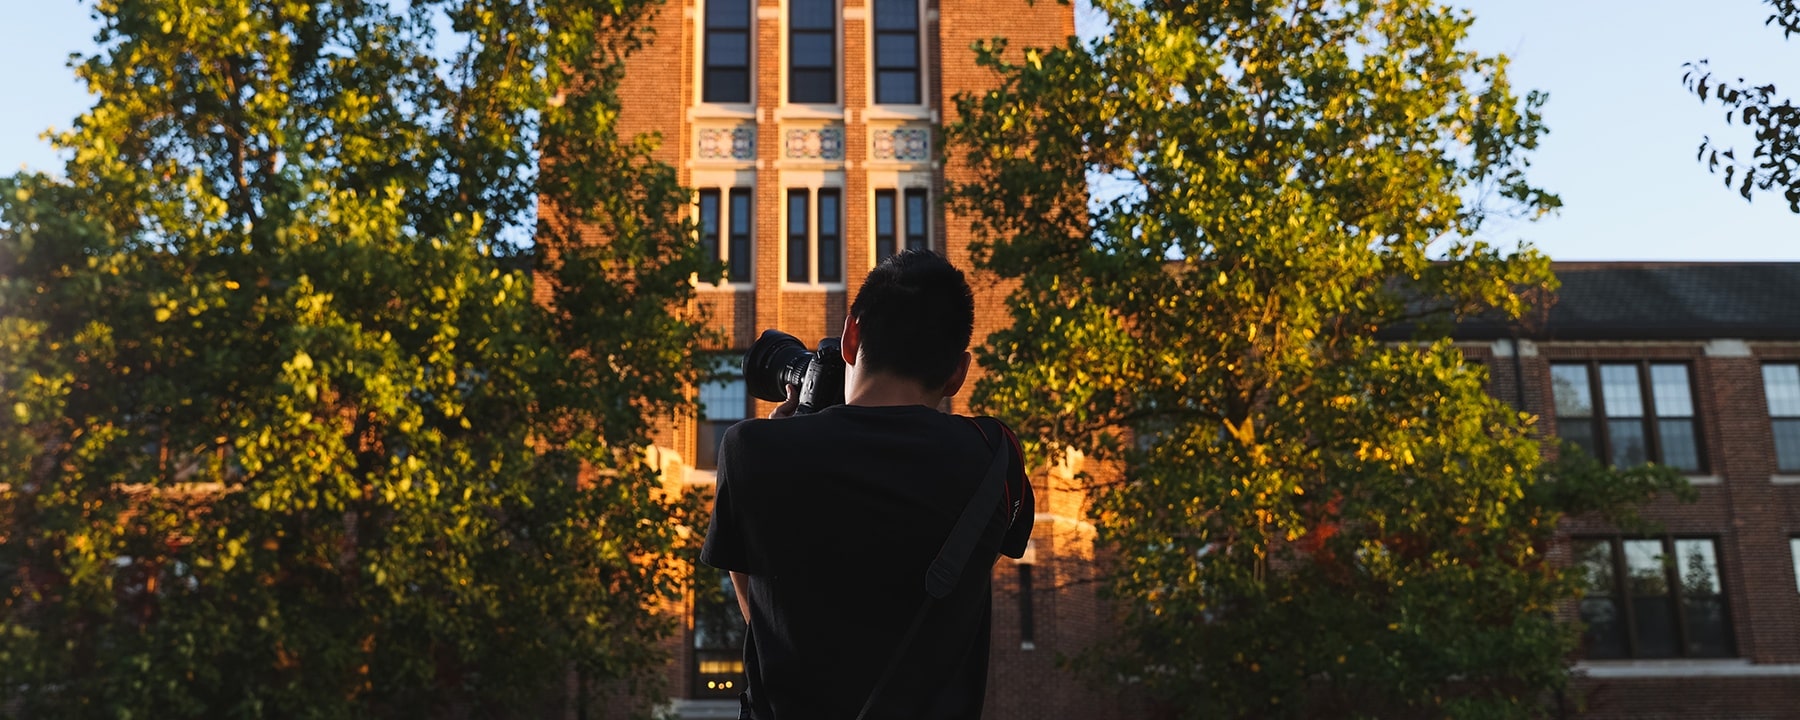 College of Art and Media photojournalism student taking picture on the campus of Central Michigan University in front of Warriner Hall.